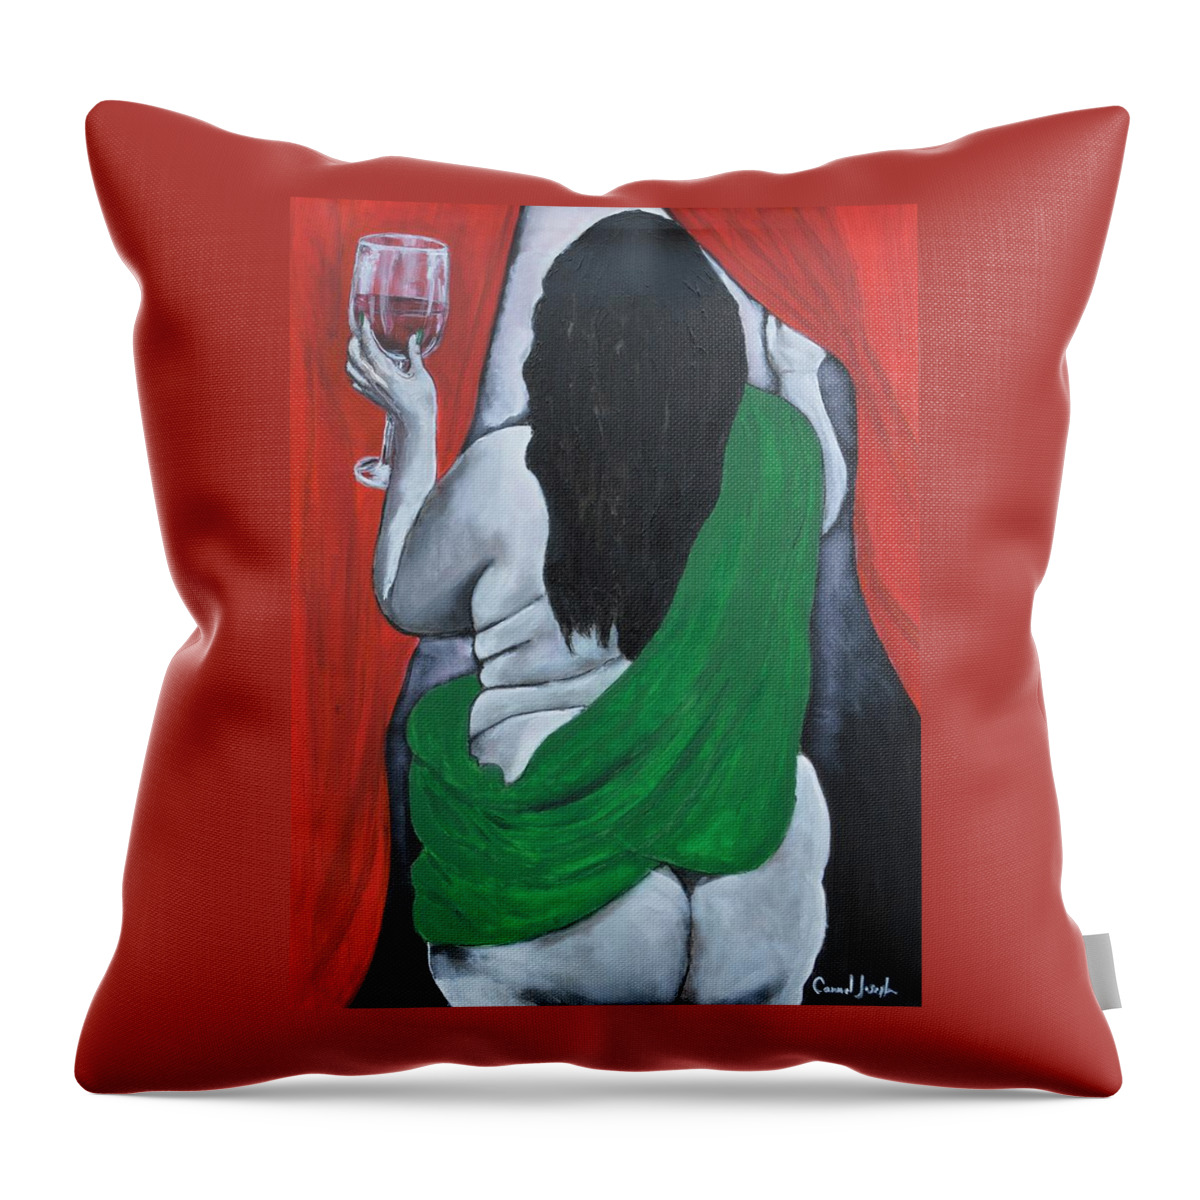 Nude Throw Pillow featuring the painting Curvaceous Allure by Carmel Joseph